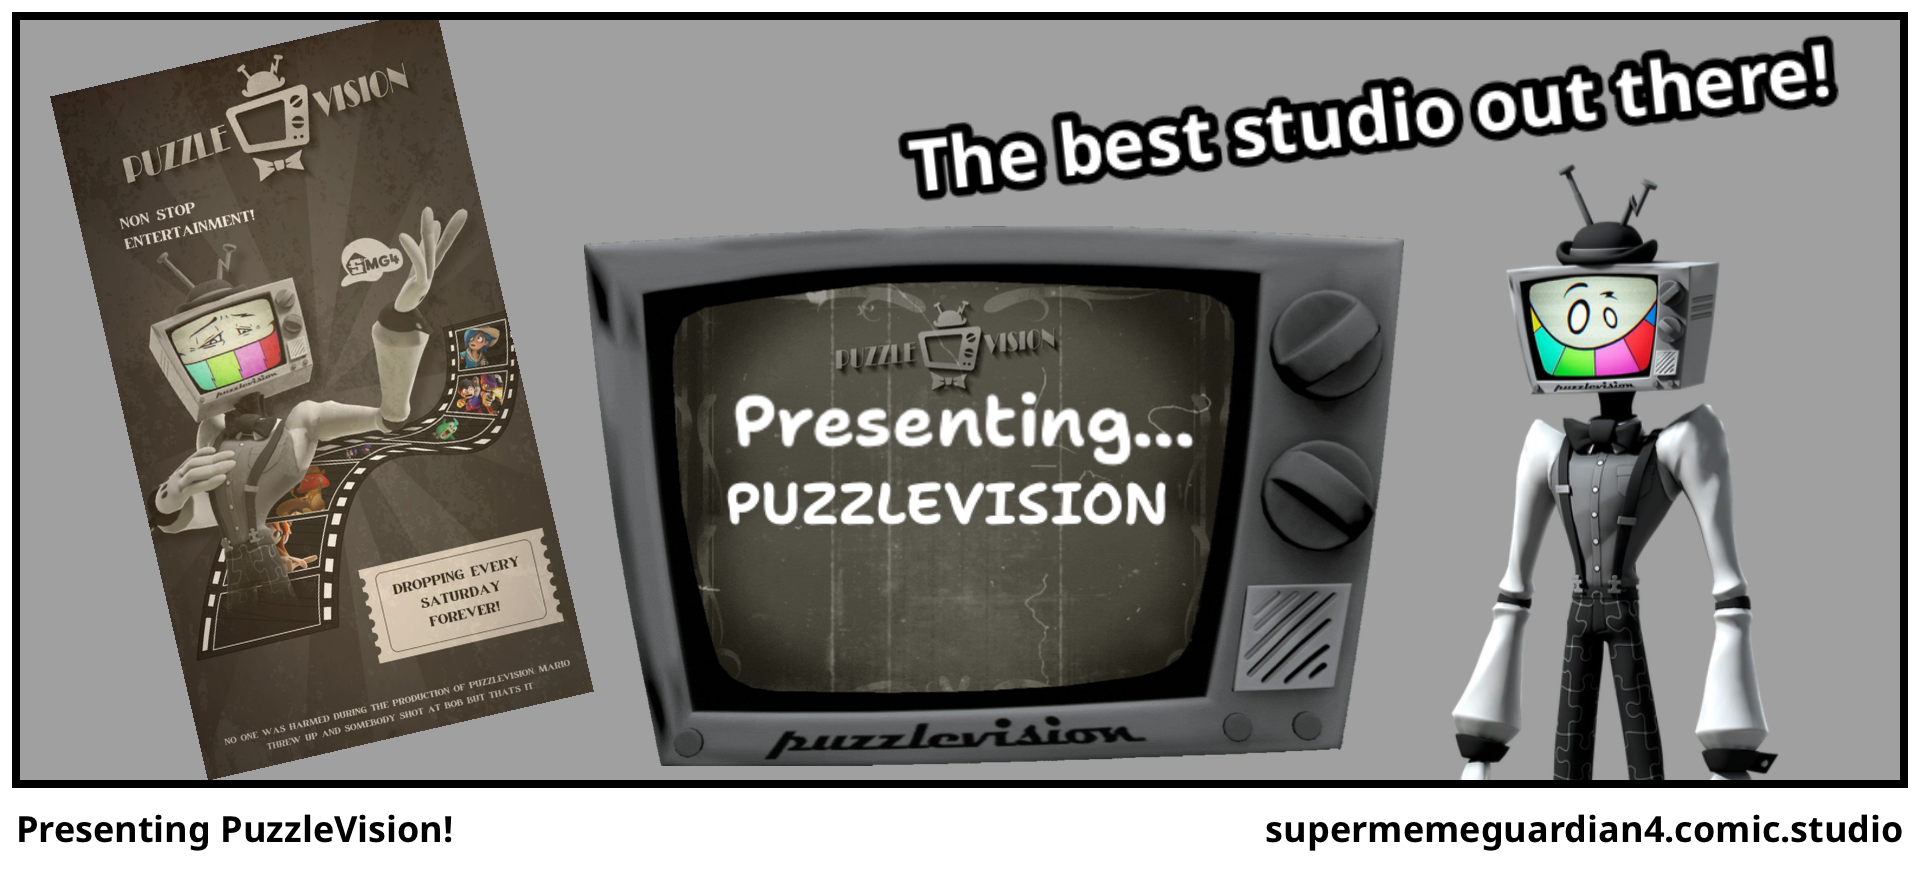 Presenting PuzzleVision!